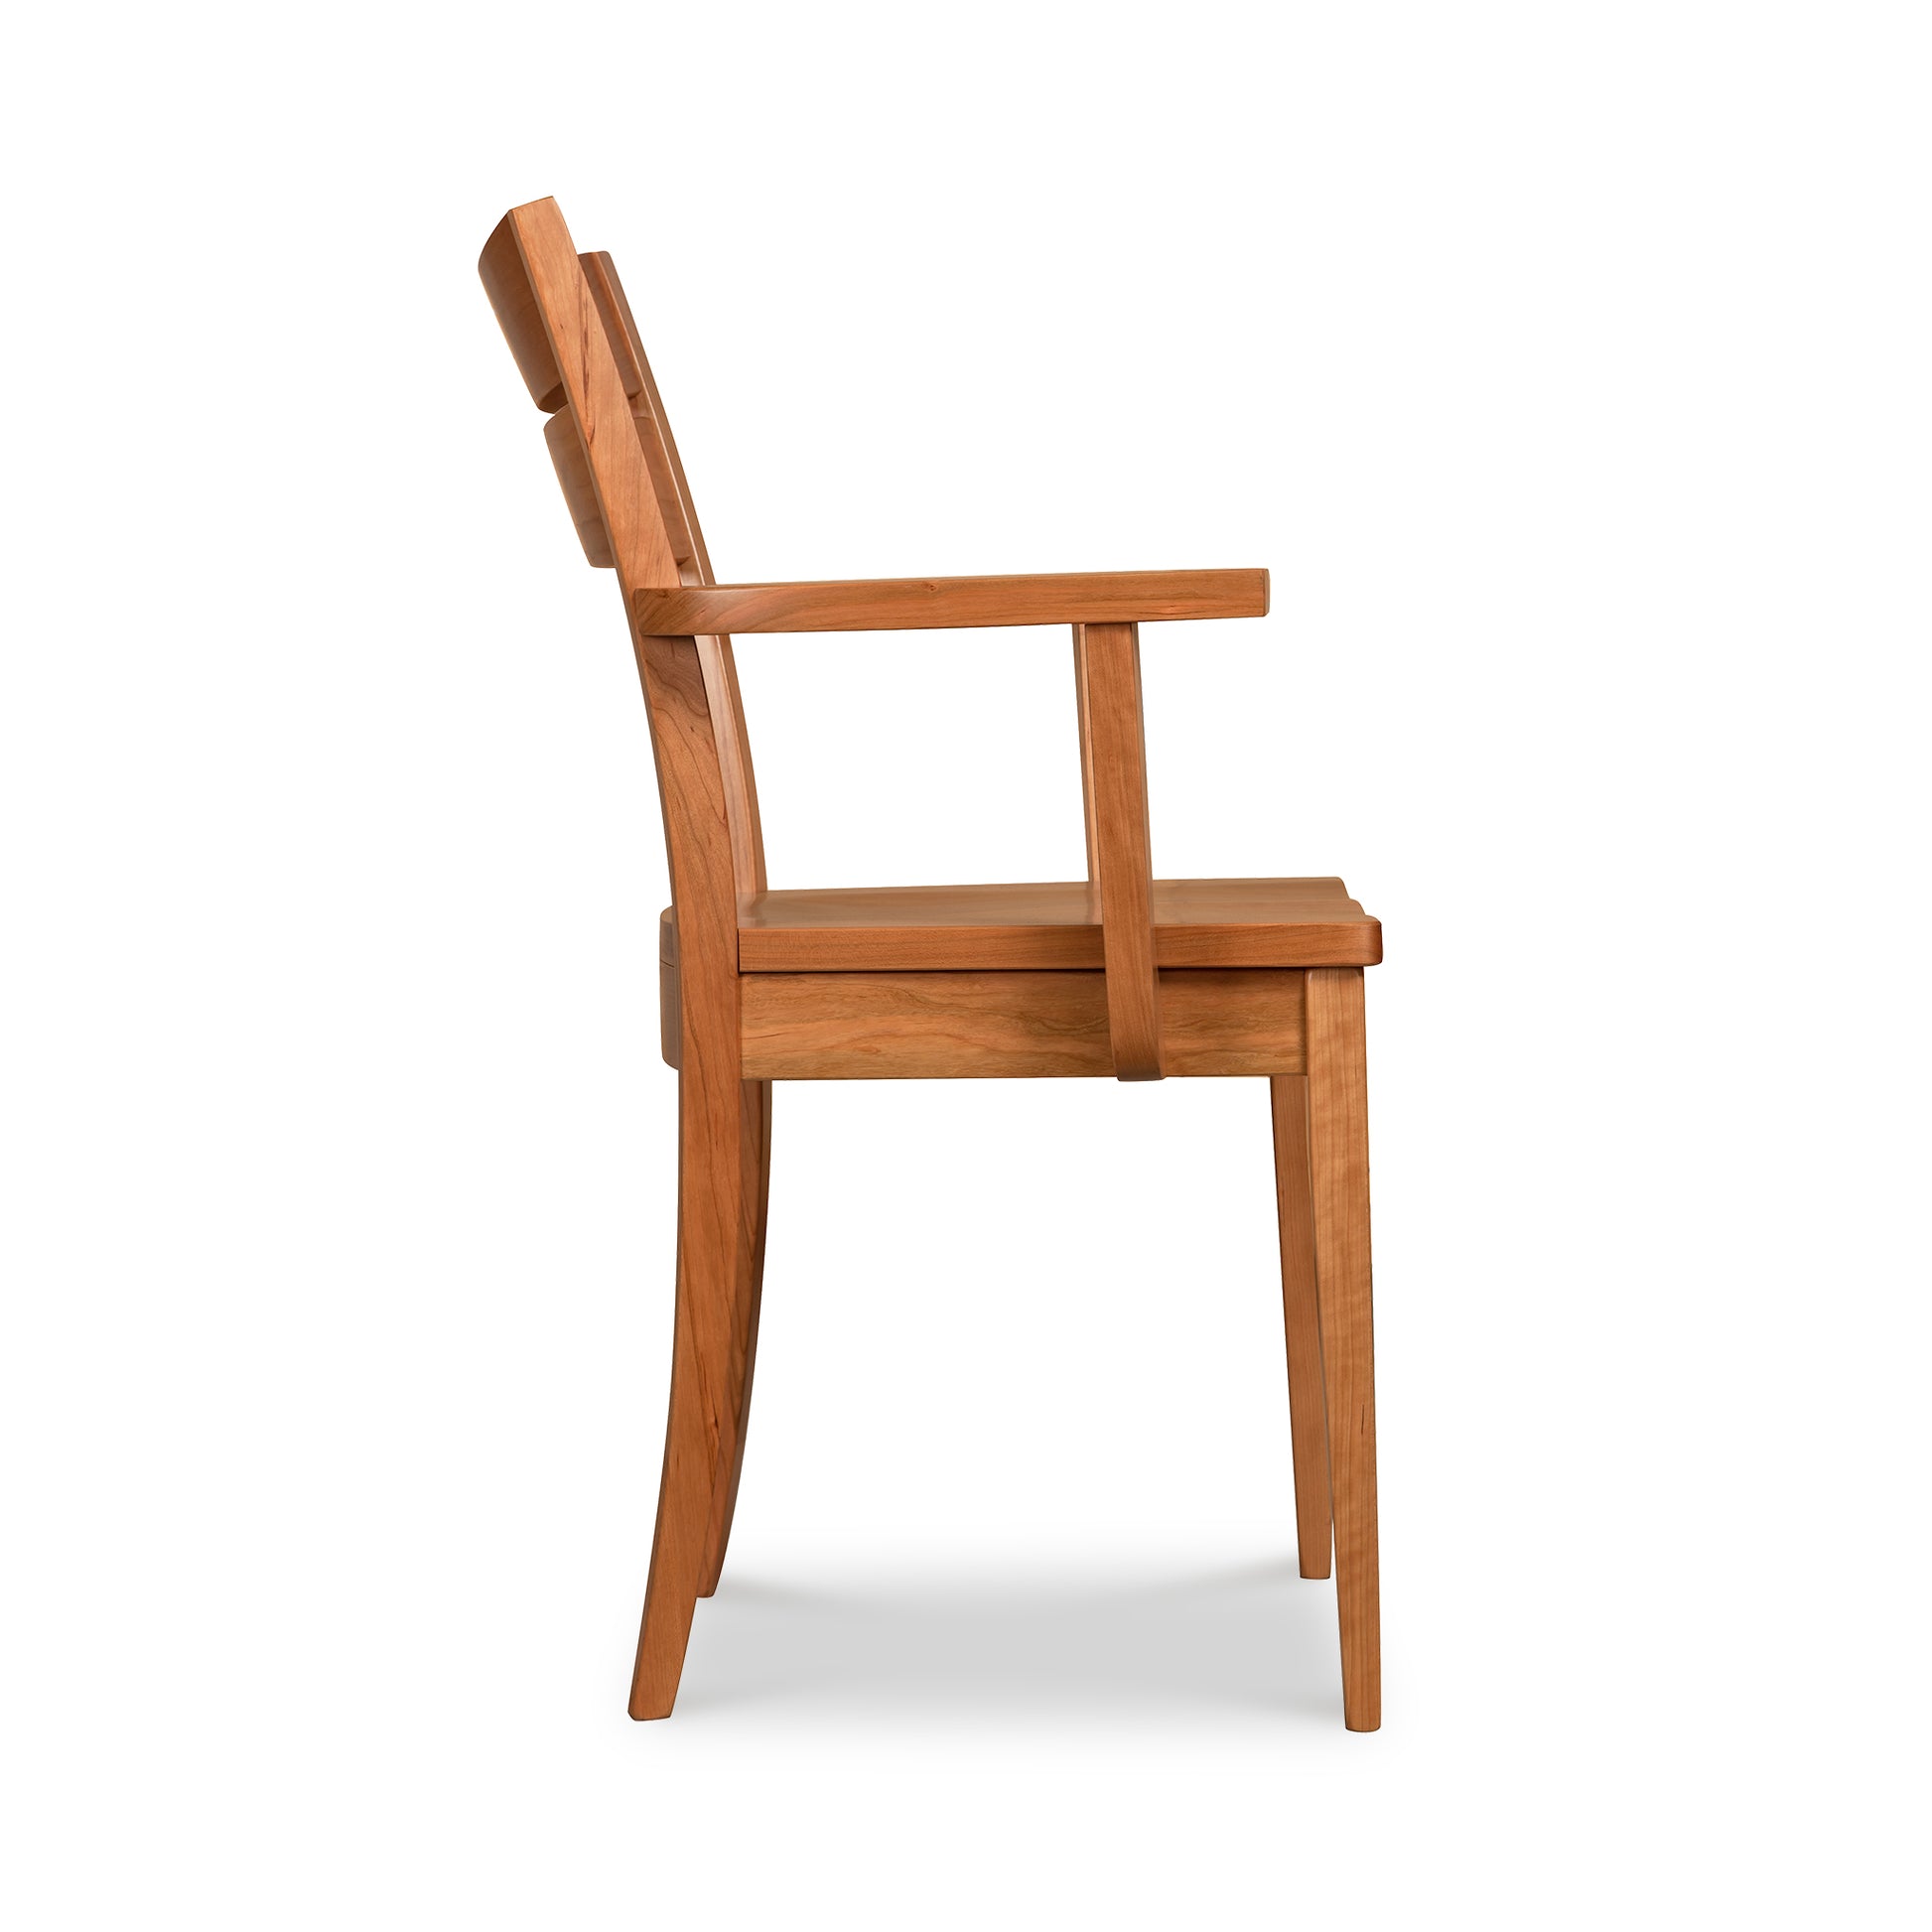 An image of a wooden arm chair.